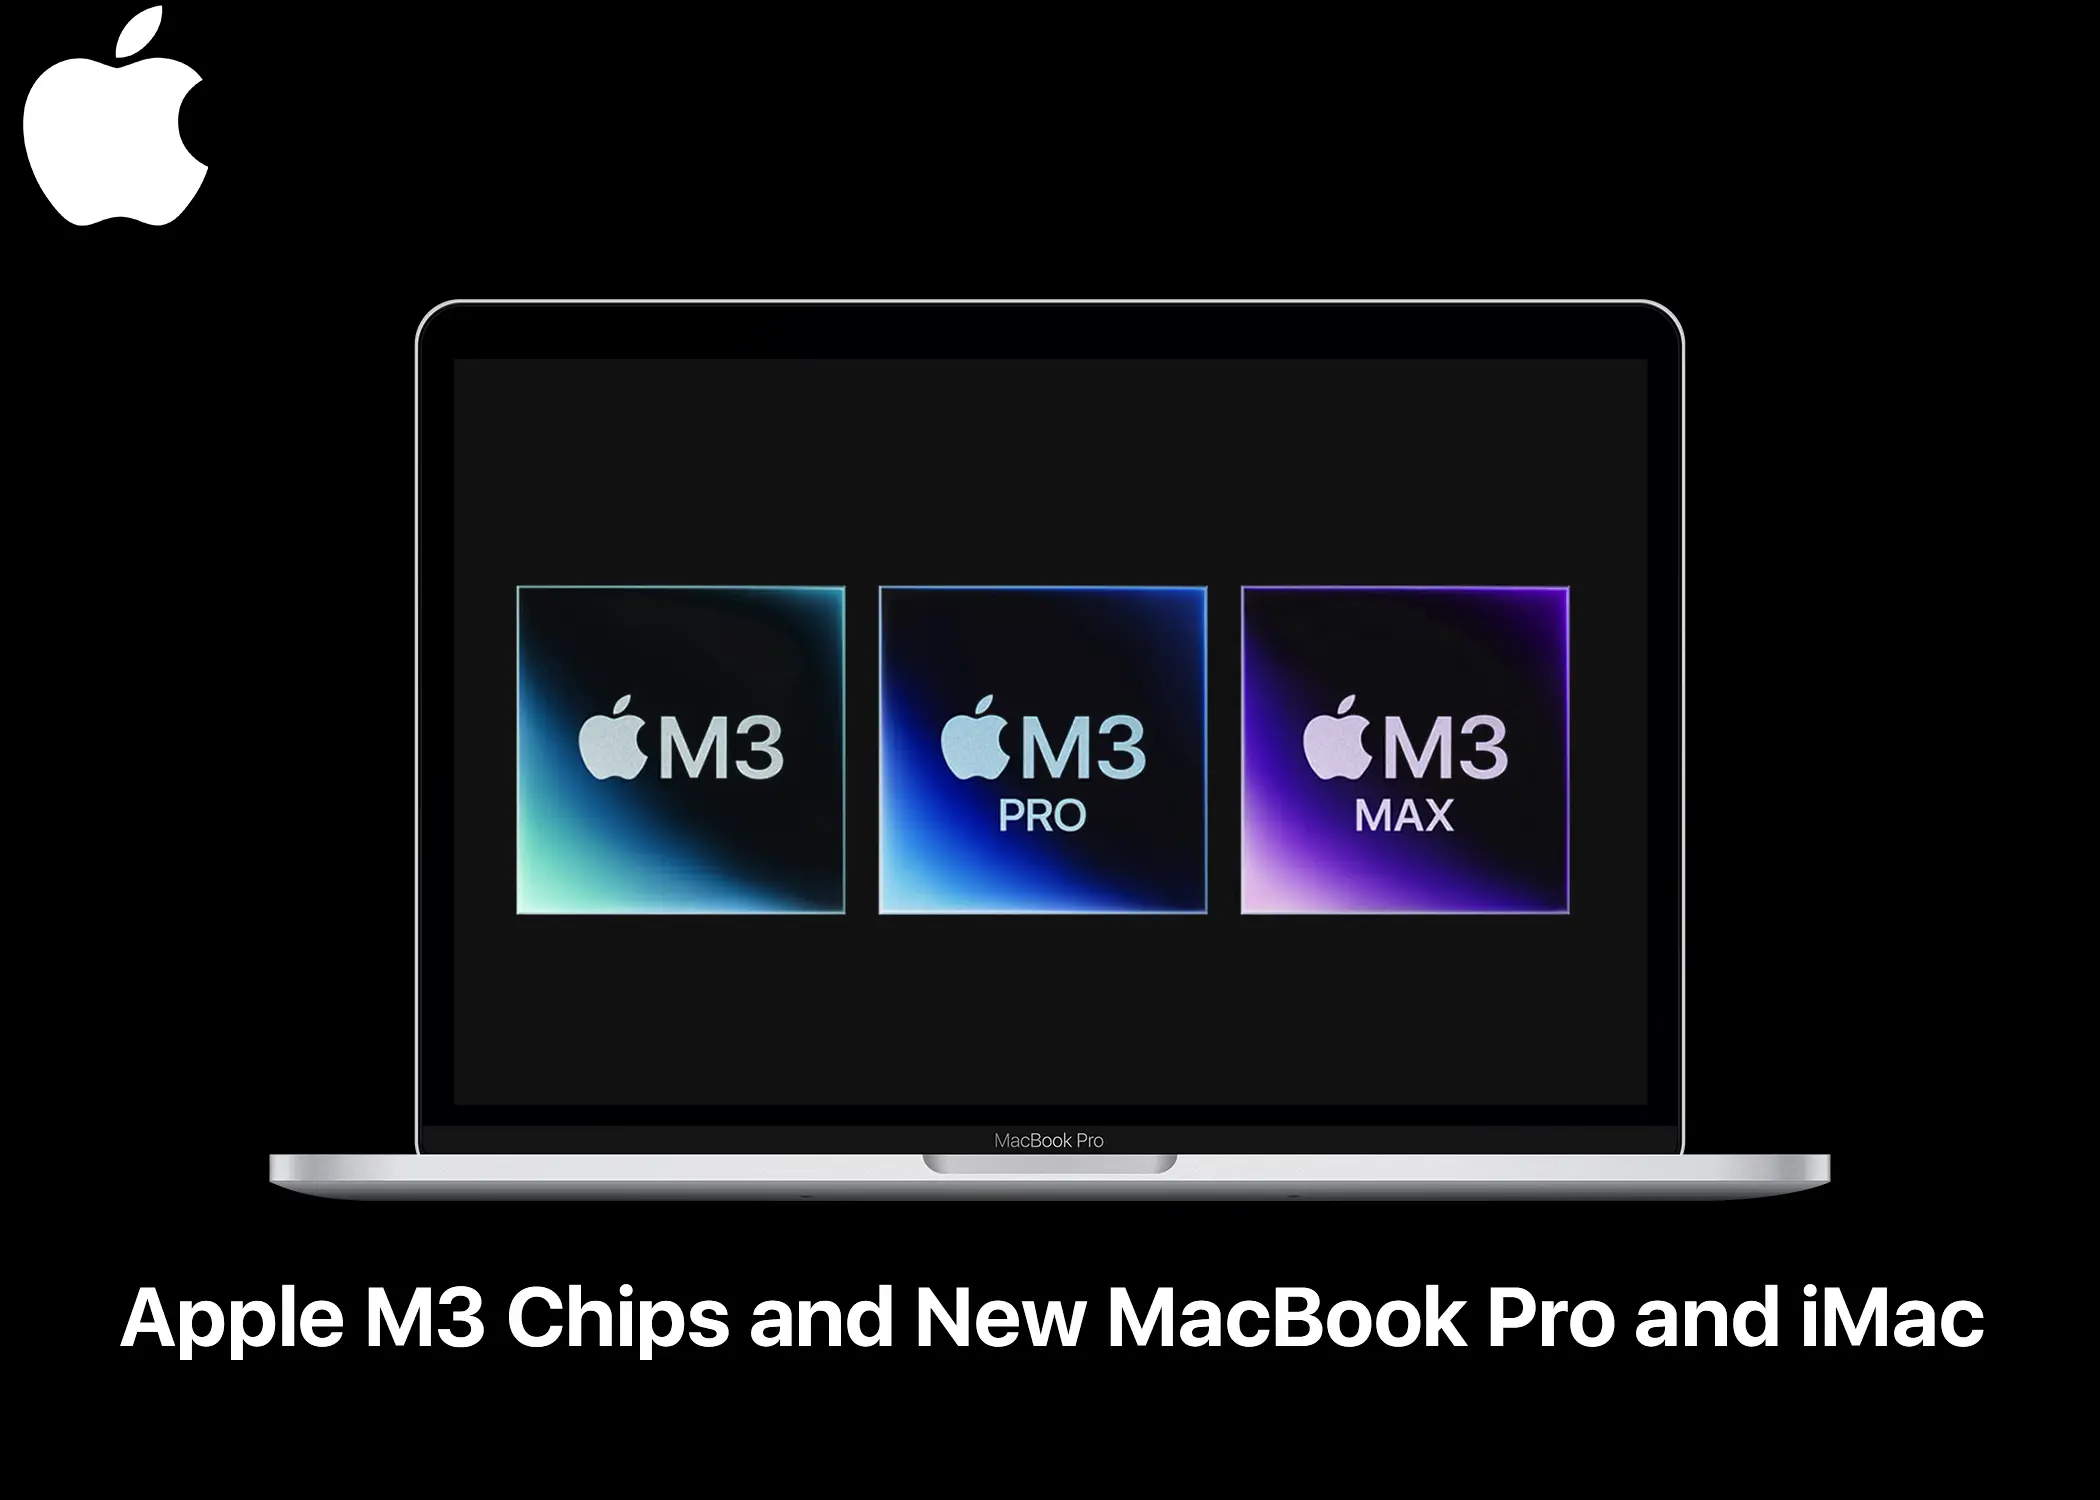 Apple M3 Chips - The New MacBook Pro and iMac Chips